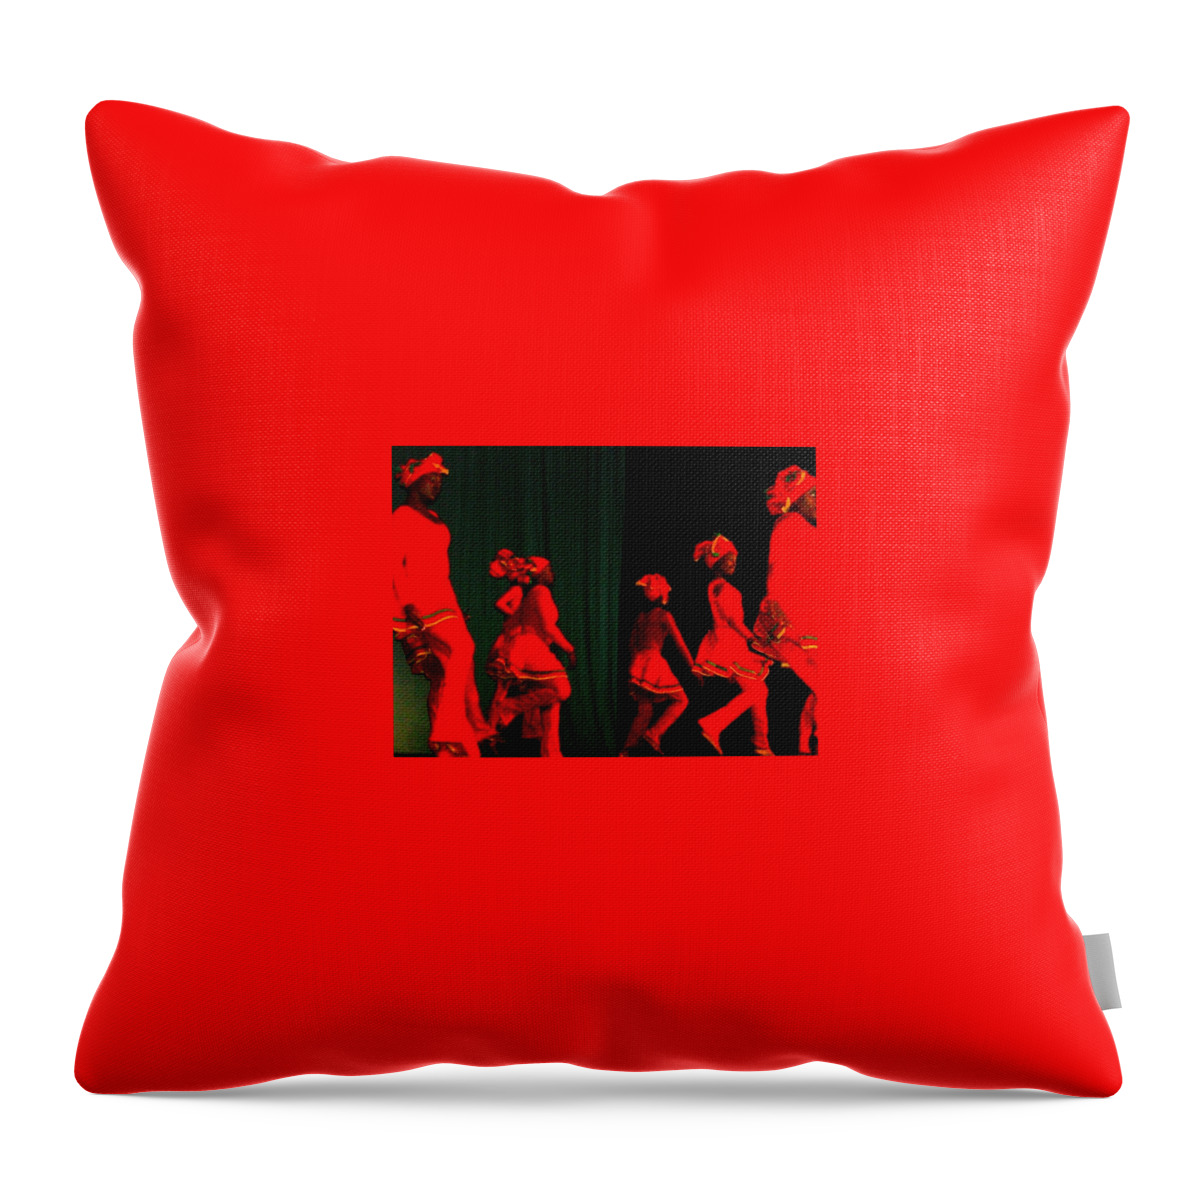  Throw Pillow featuring the photograph Briganti by Trevor A Smith